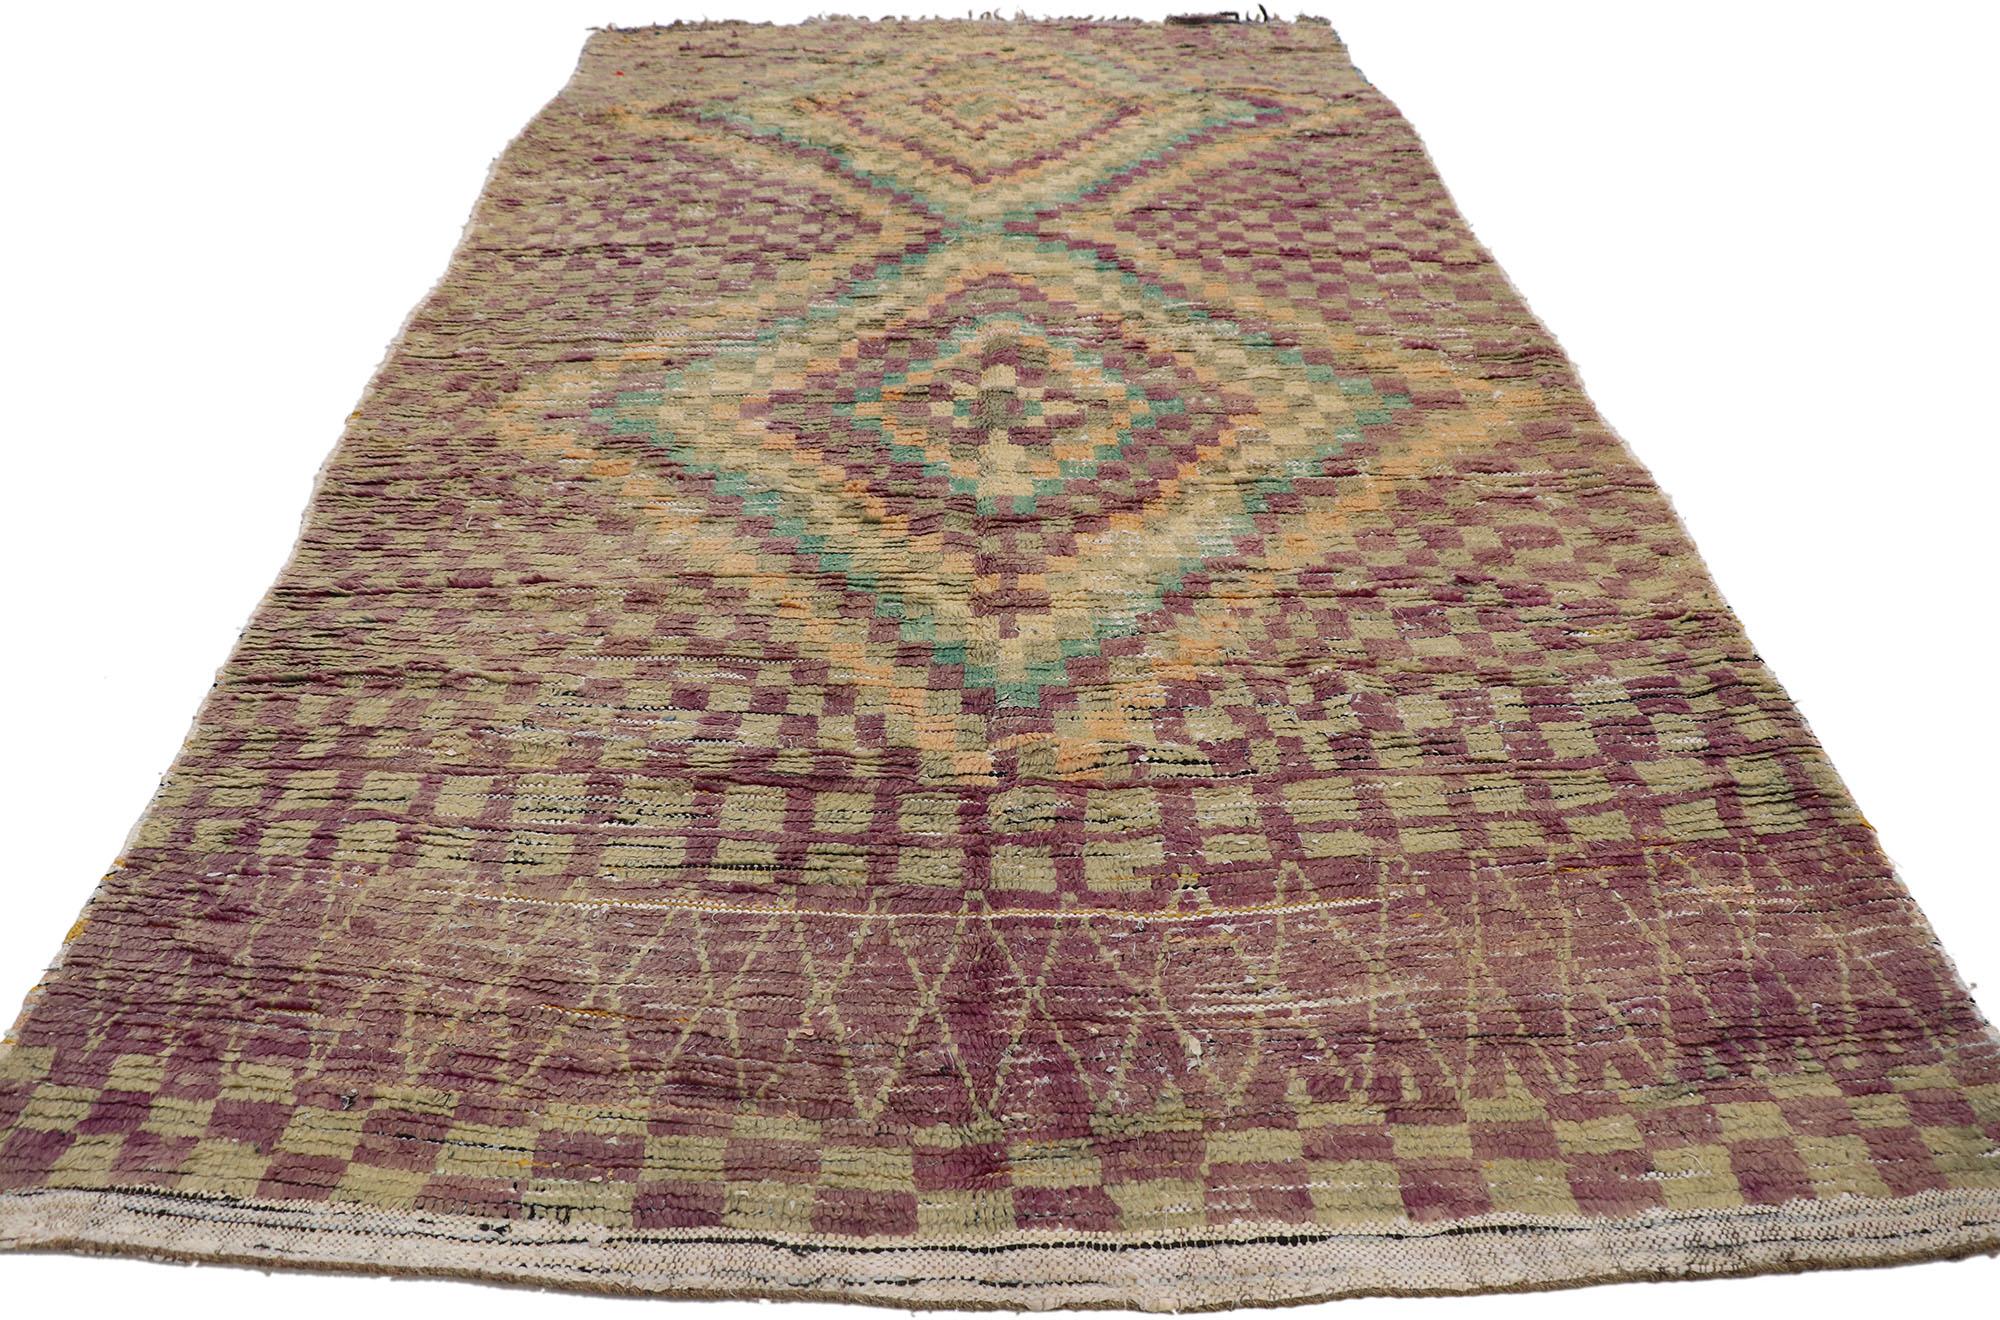 Hand-Knotted Rustic Boho Chic Style Vintage Moroccan Rug by Berber Tribes of Morocco For Sale